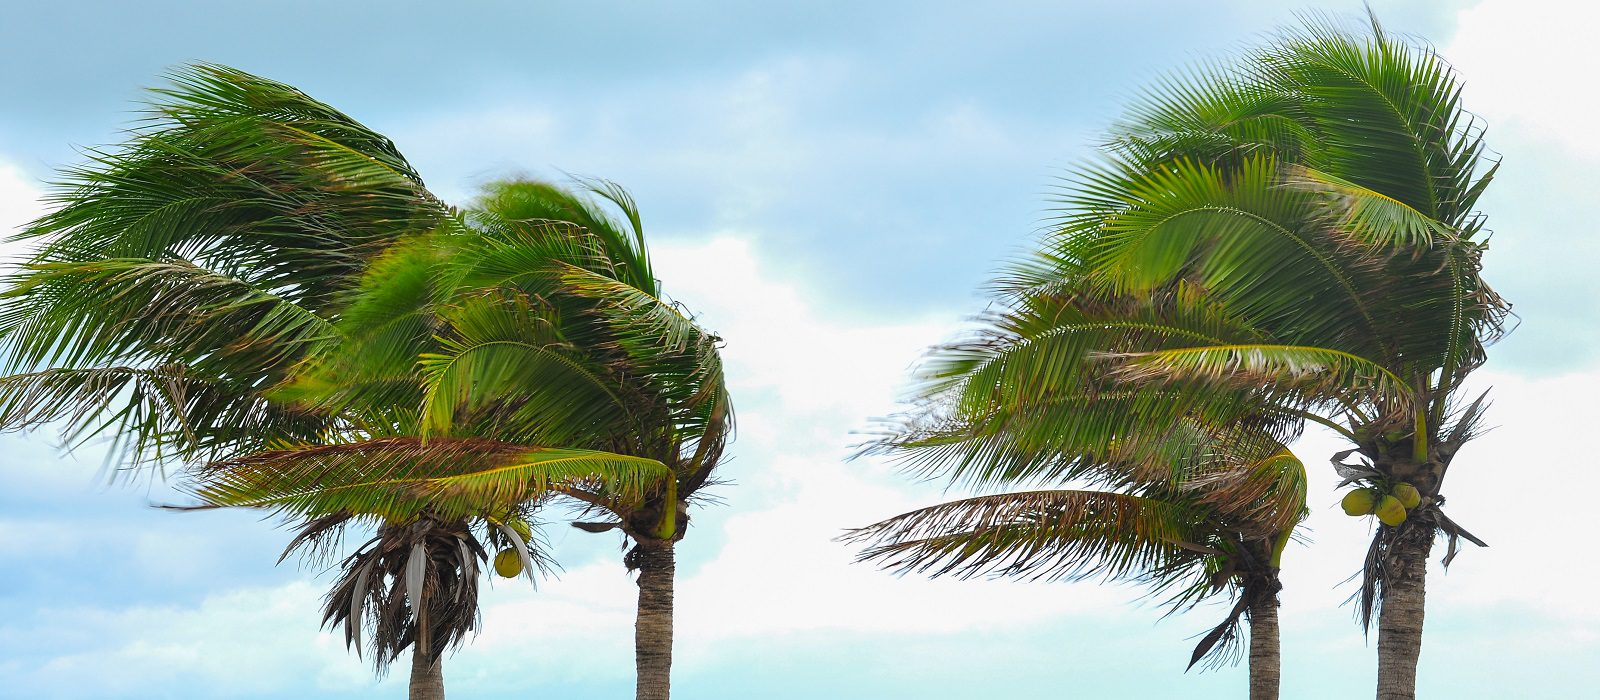 Palm tree at hurrican windstorm. Storng wind make palm leaf heavy blow follow wind direction.